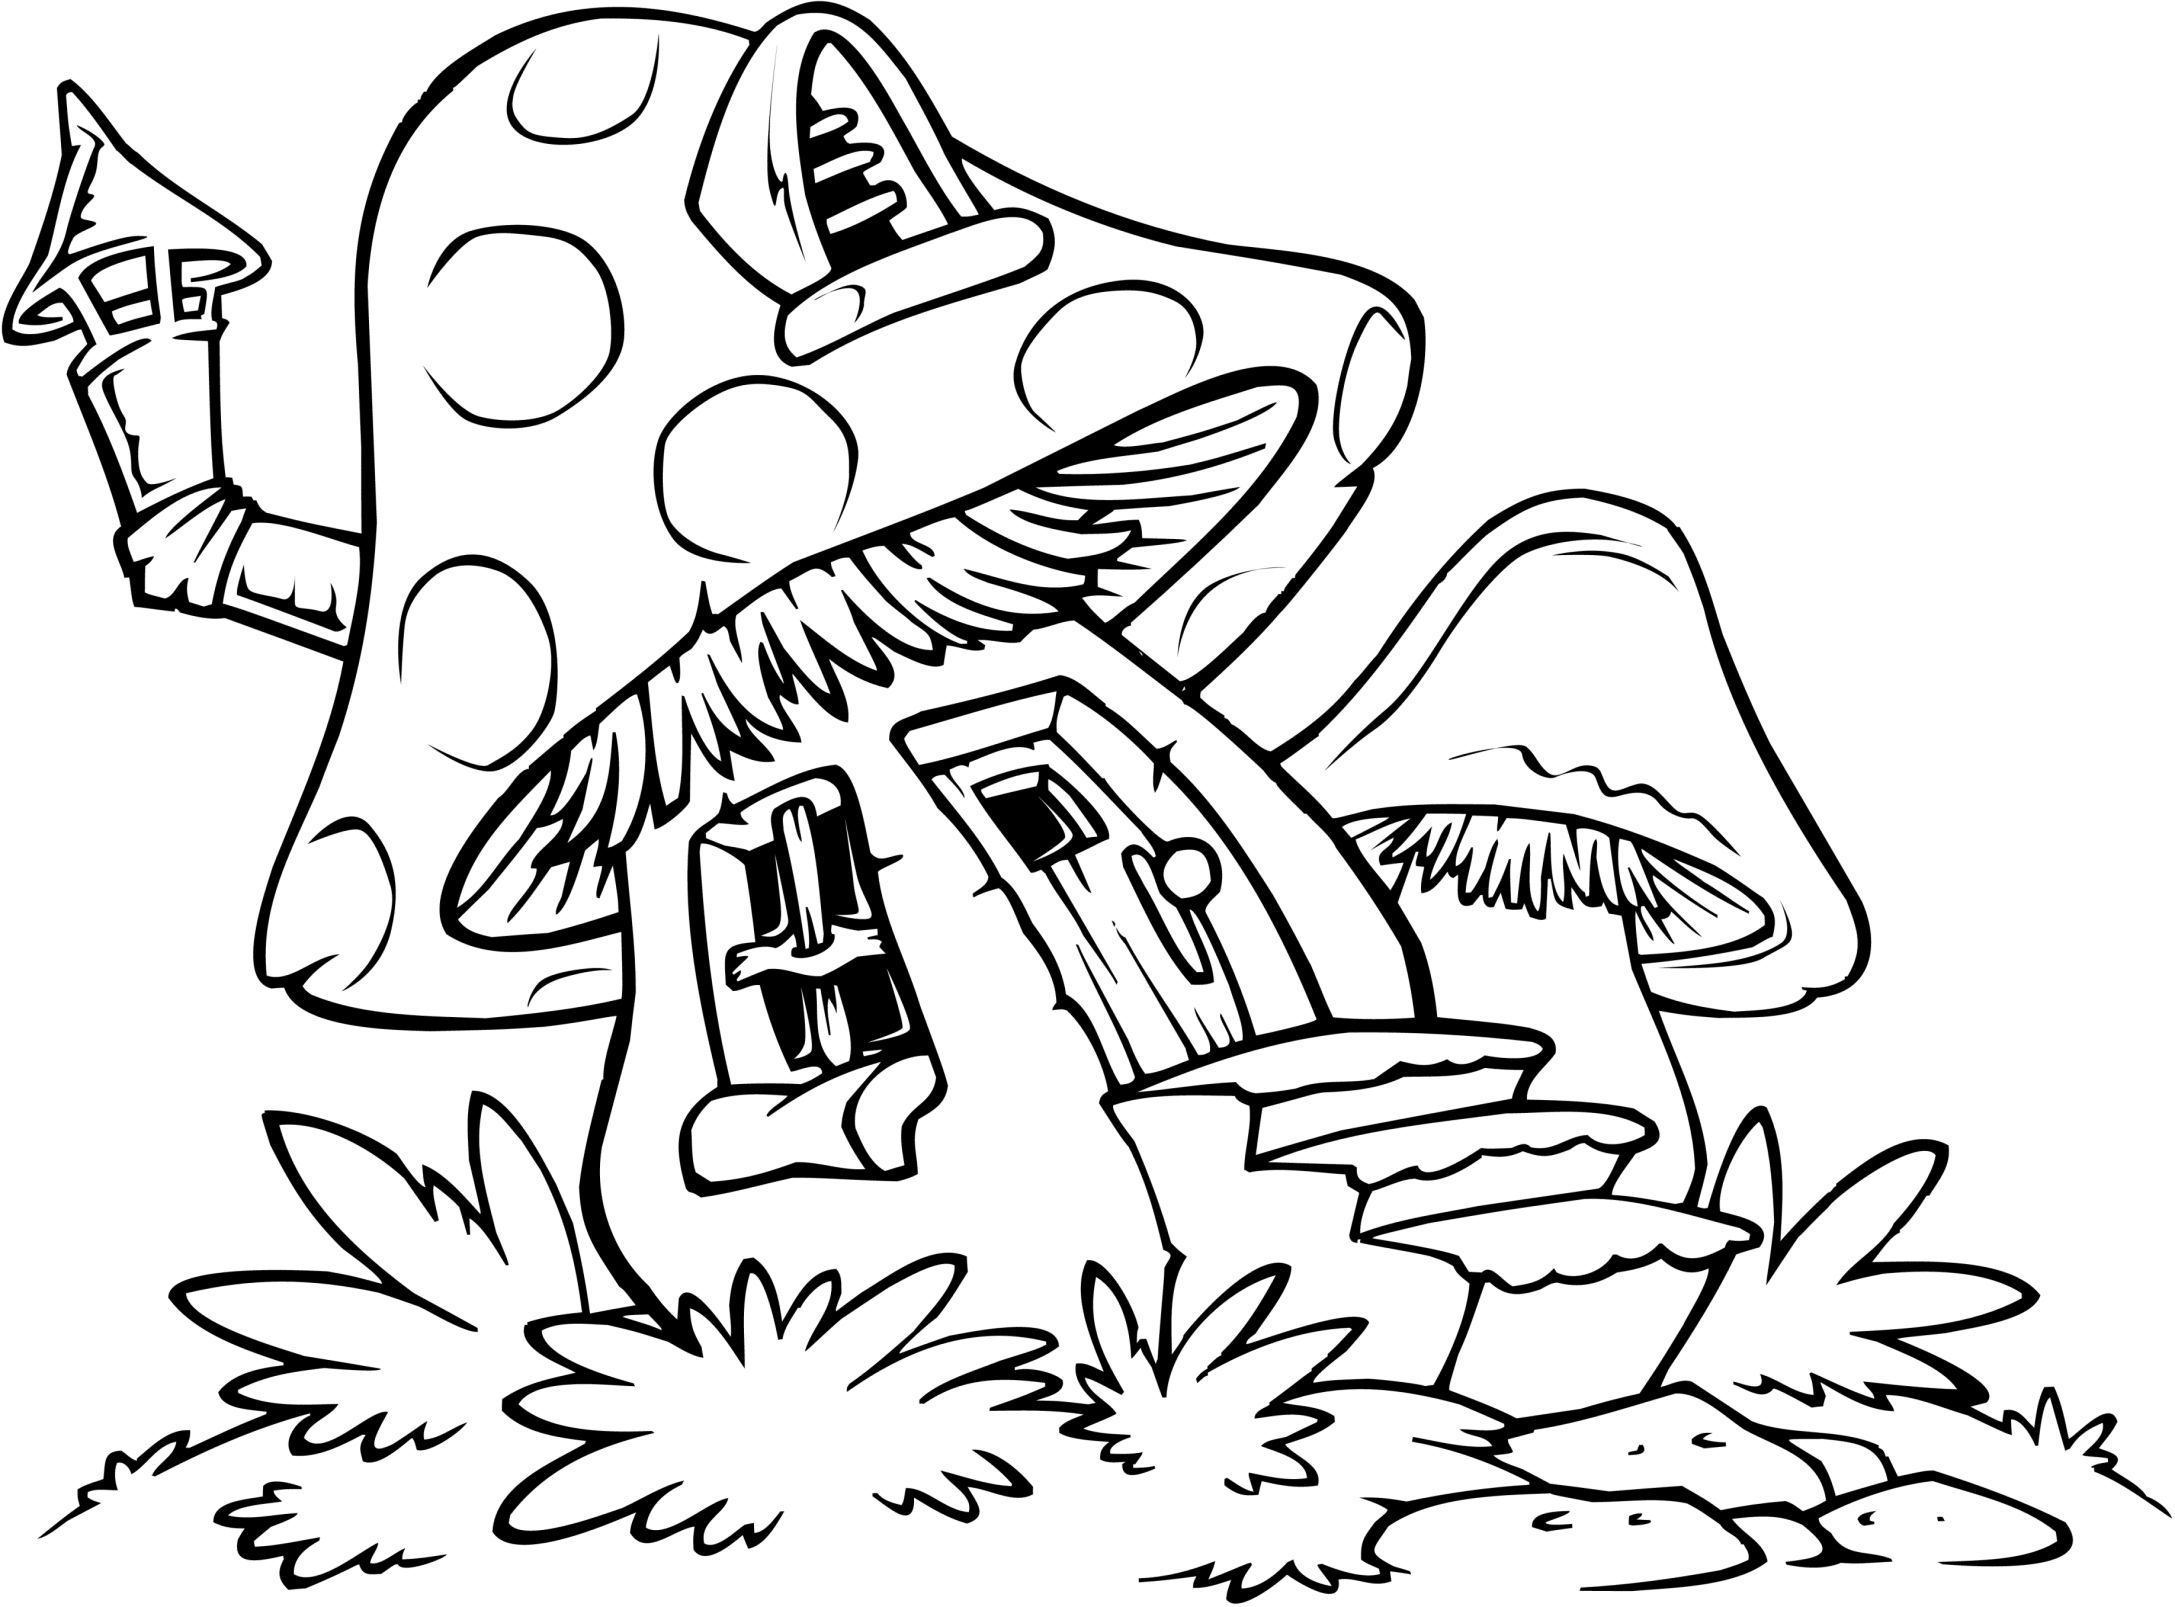 Easy Coloring Pages | Zendoodles For Cards | Pinterest | House - Free Printable Mushroom Coloring Pages